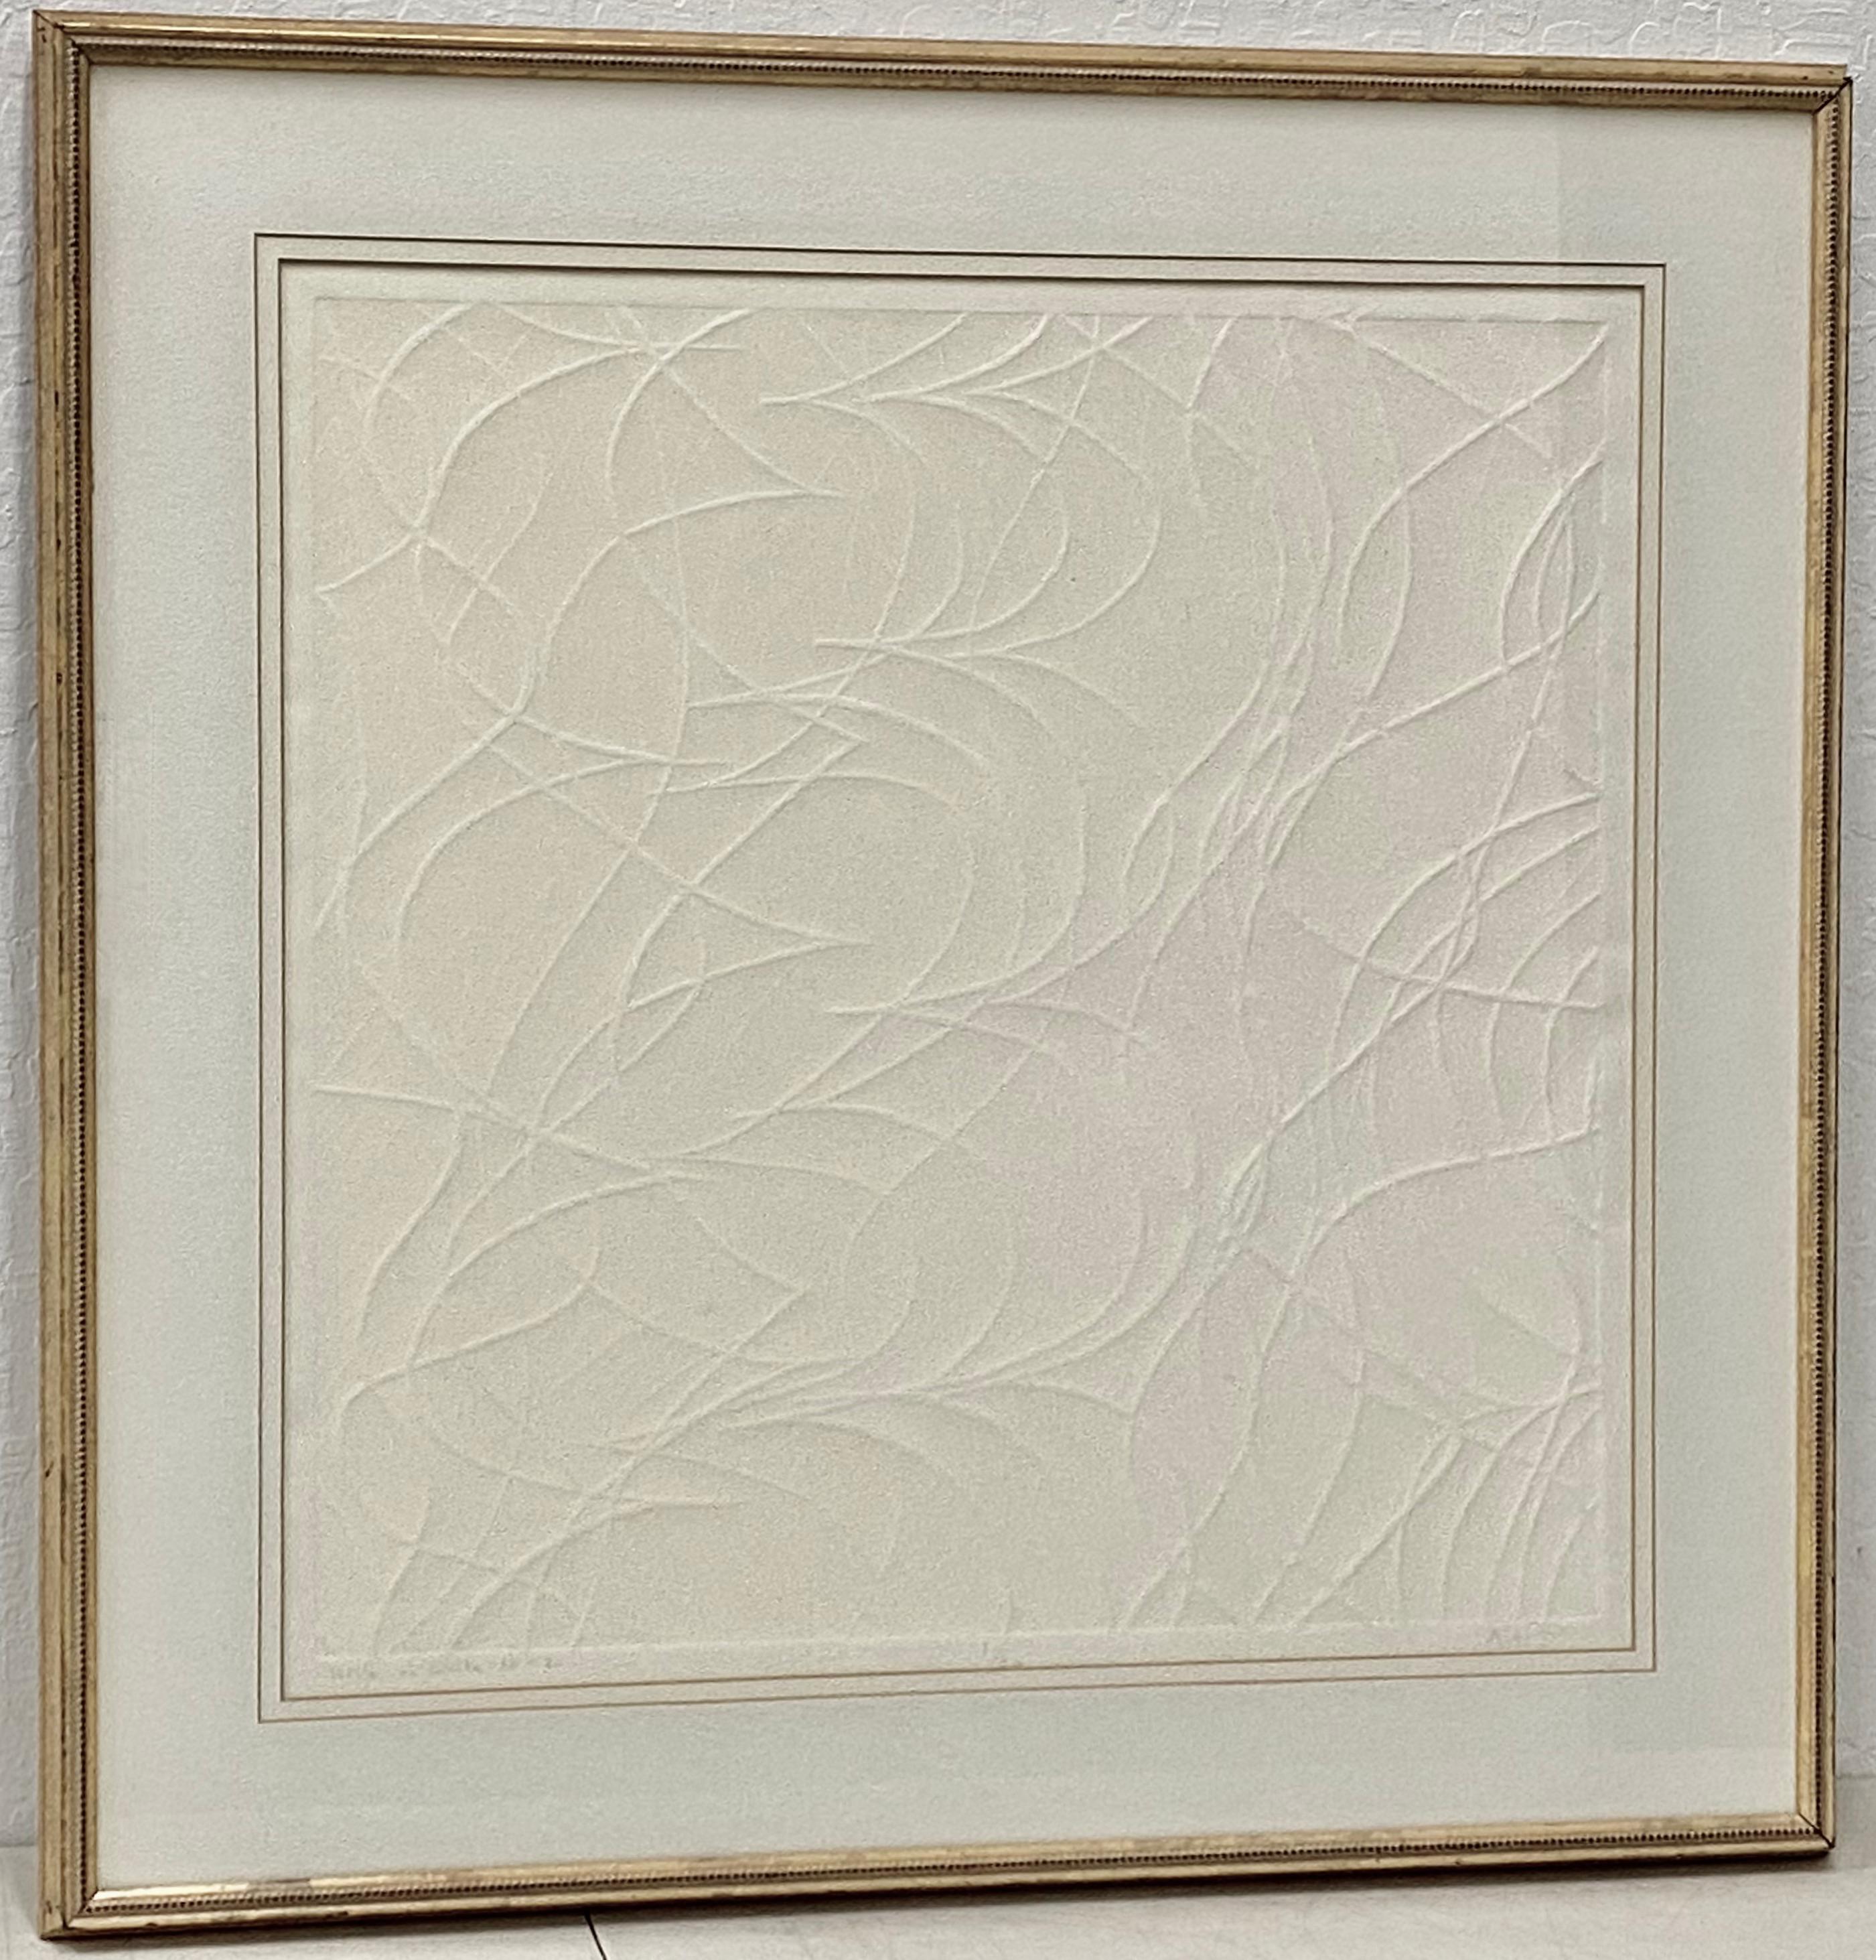 Ray Rapp "White on White #2" Signed Intaglio Print C.1981

Raised intaglio print "White on White #2" 

Plate dimensions 24" wide x 24" high

The frame measures 33.5" wide x 33.5" high

Pencil signed lower right - Titled lower left

Very good